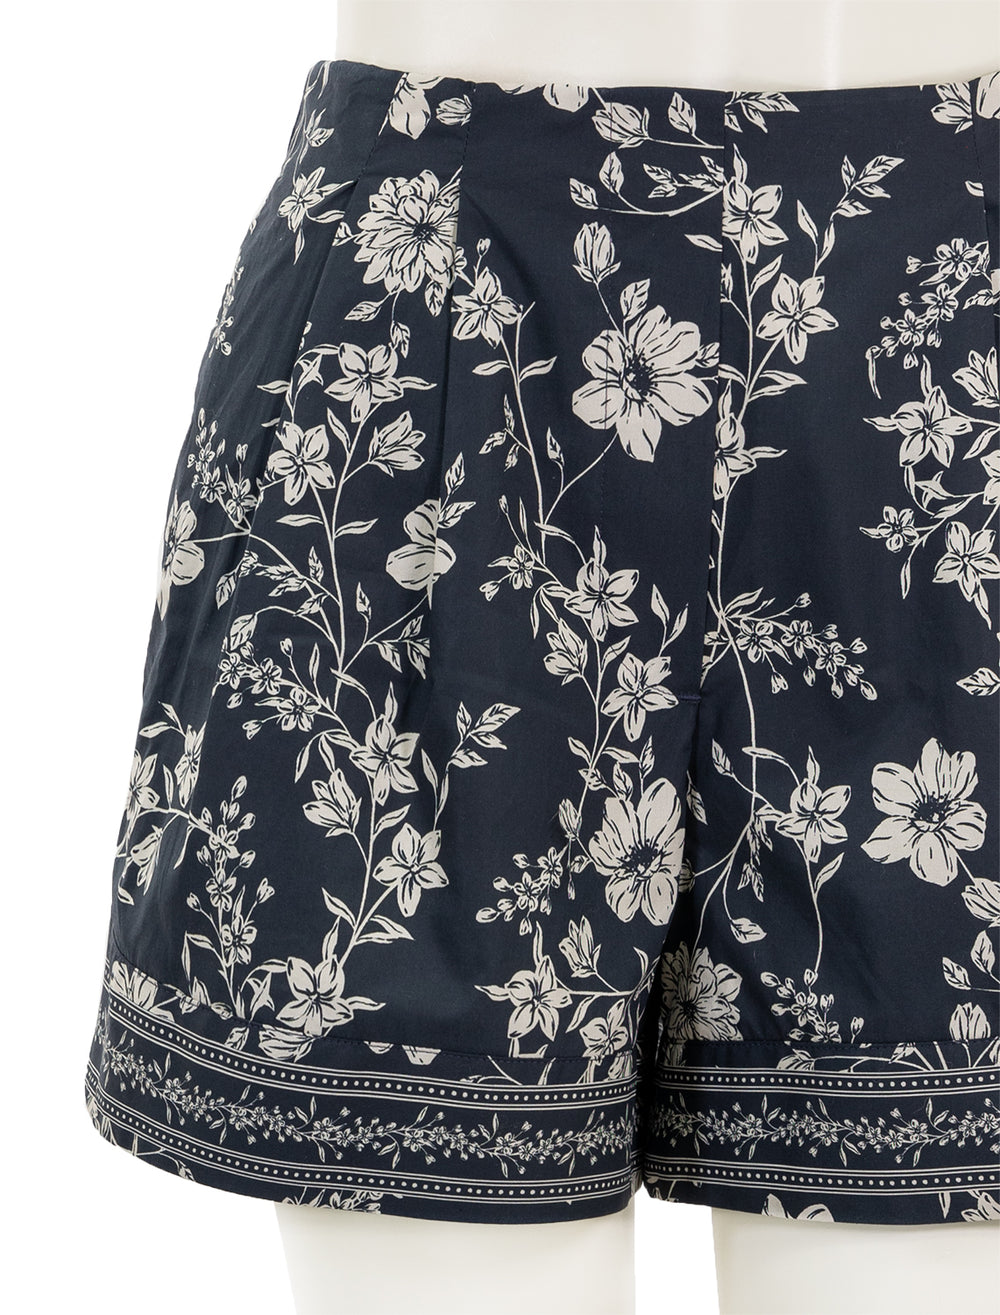 Close-up view of Cara Cara's trish shorts in evening meadow mist.